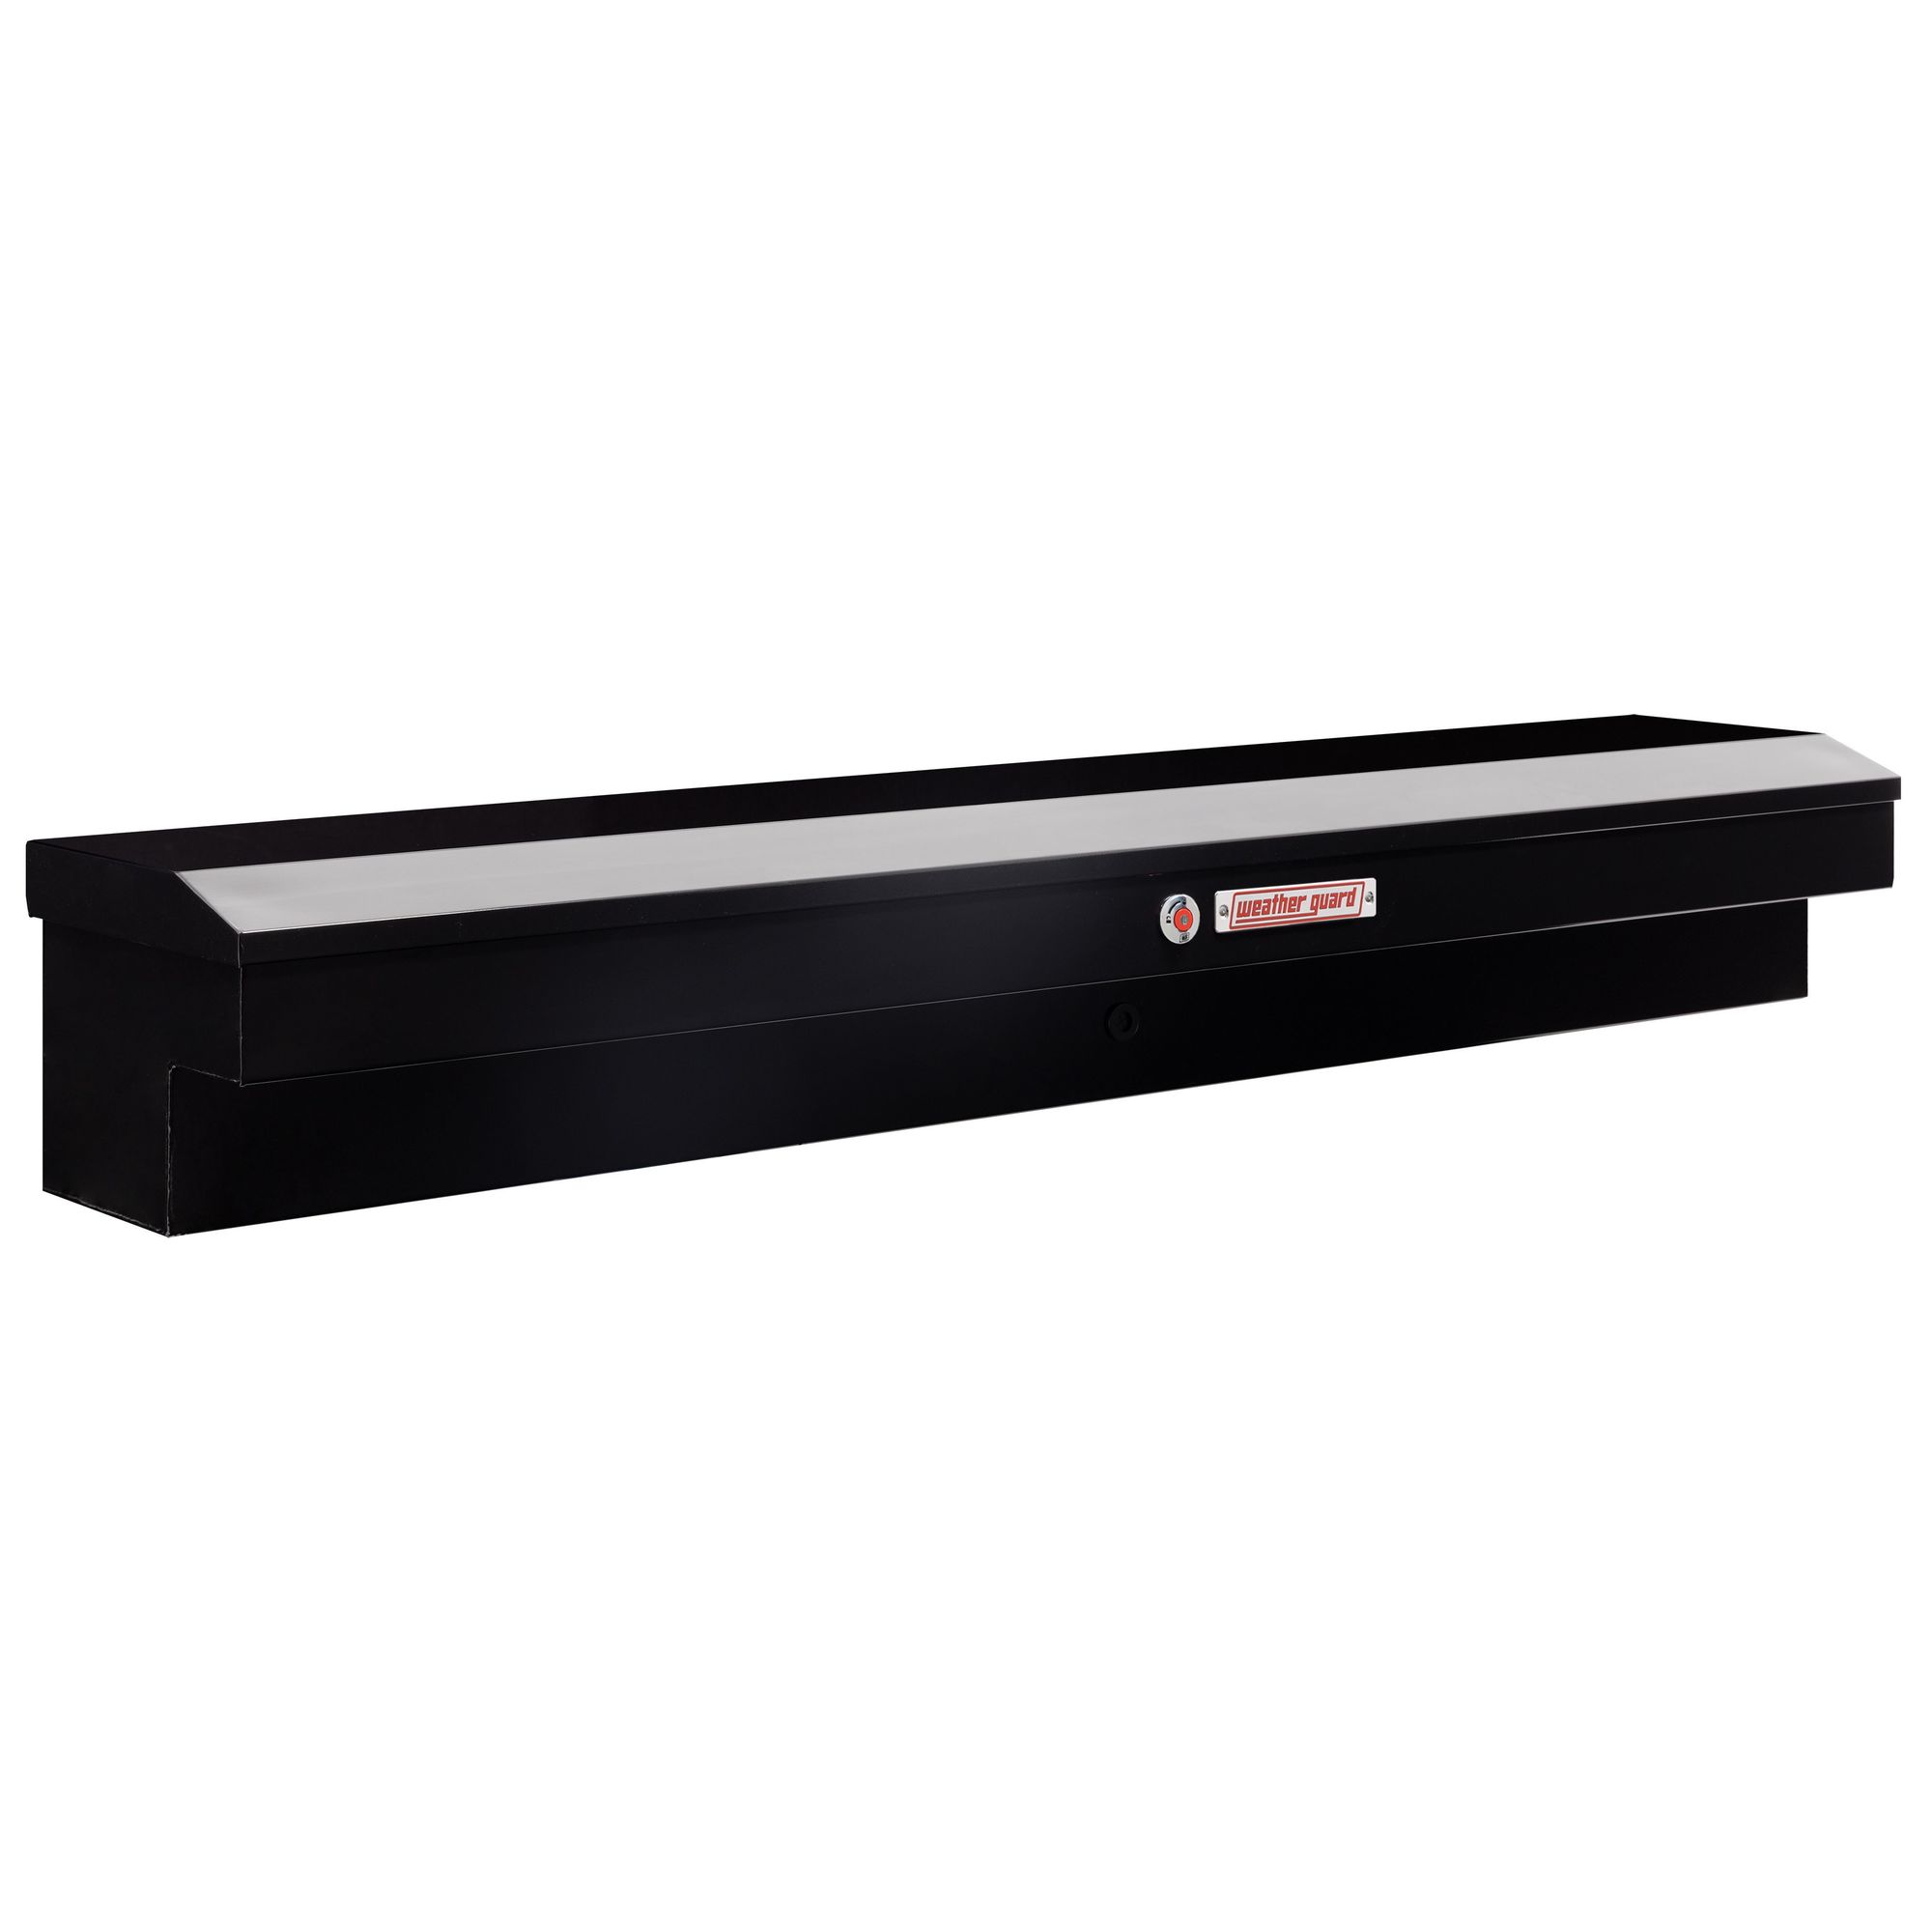 Weather Guard, 87Inch Lo-Side Box, Steel, Gloss Black, Width 87 in, Material Steel, Color Finish Gloss Black, Model 165-5-04